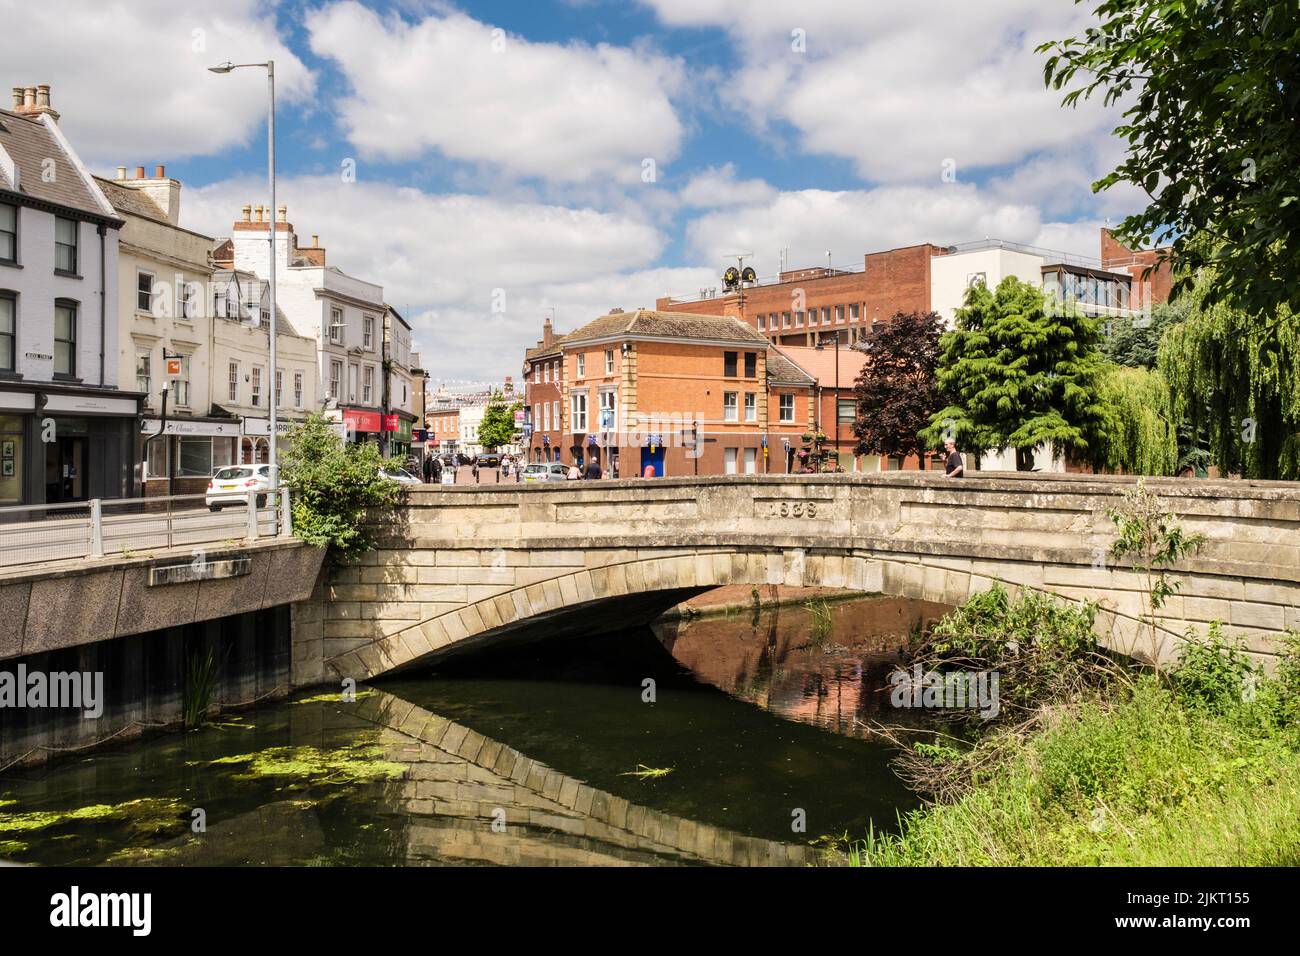 The old bridge over the River Welland and view to town centre shops. Spalding, Lincolnshire, England, UK, Britain Stock Photo